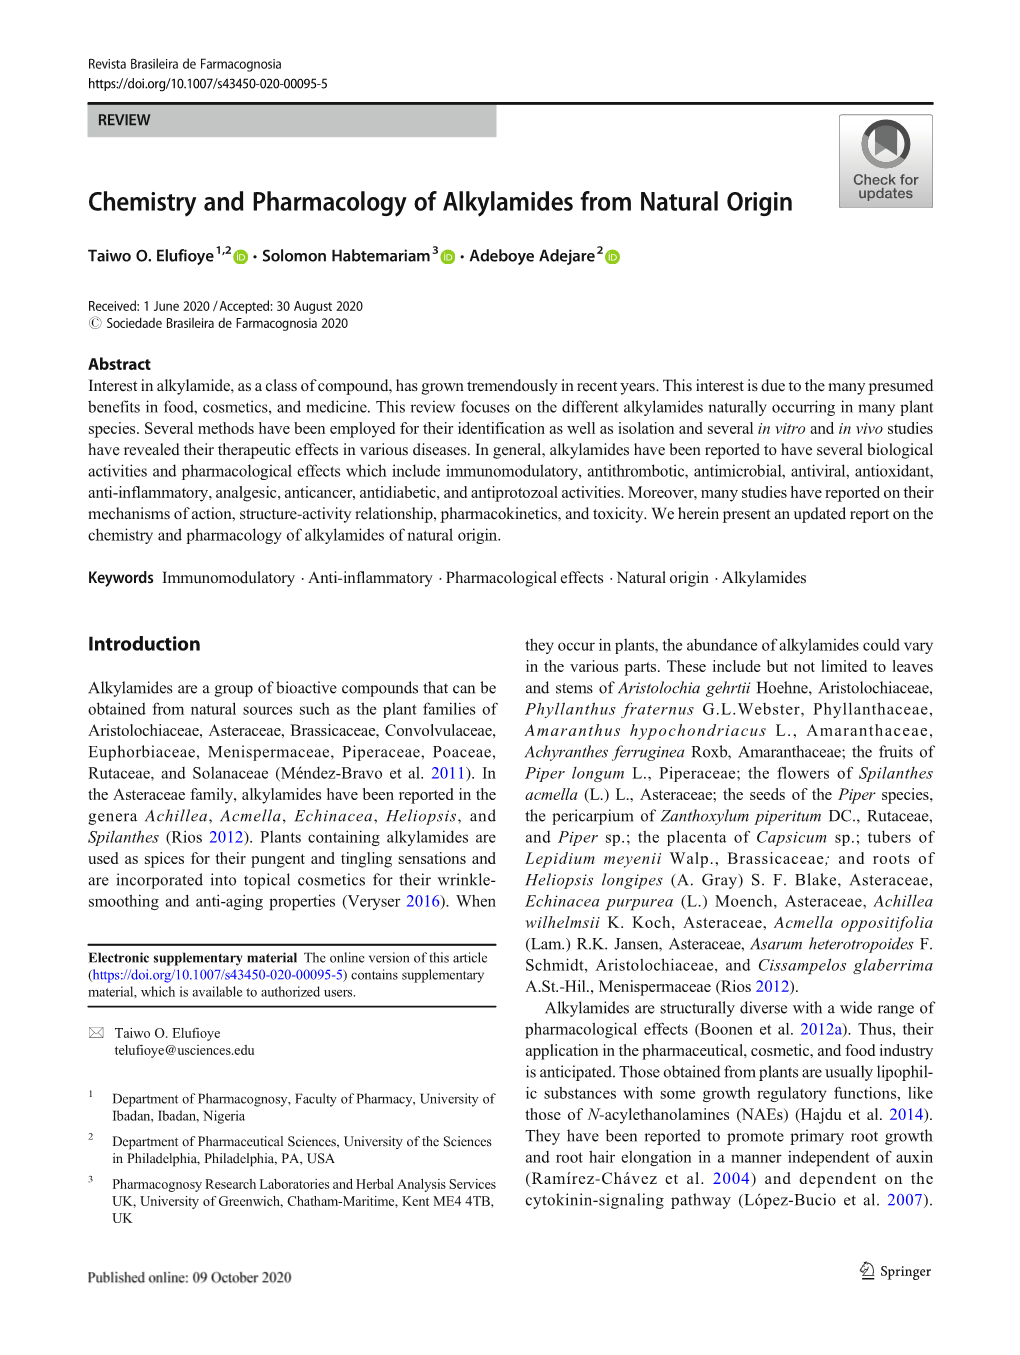 Chemistry and Pharmacology of Alkylamides from Natural Origin